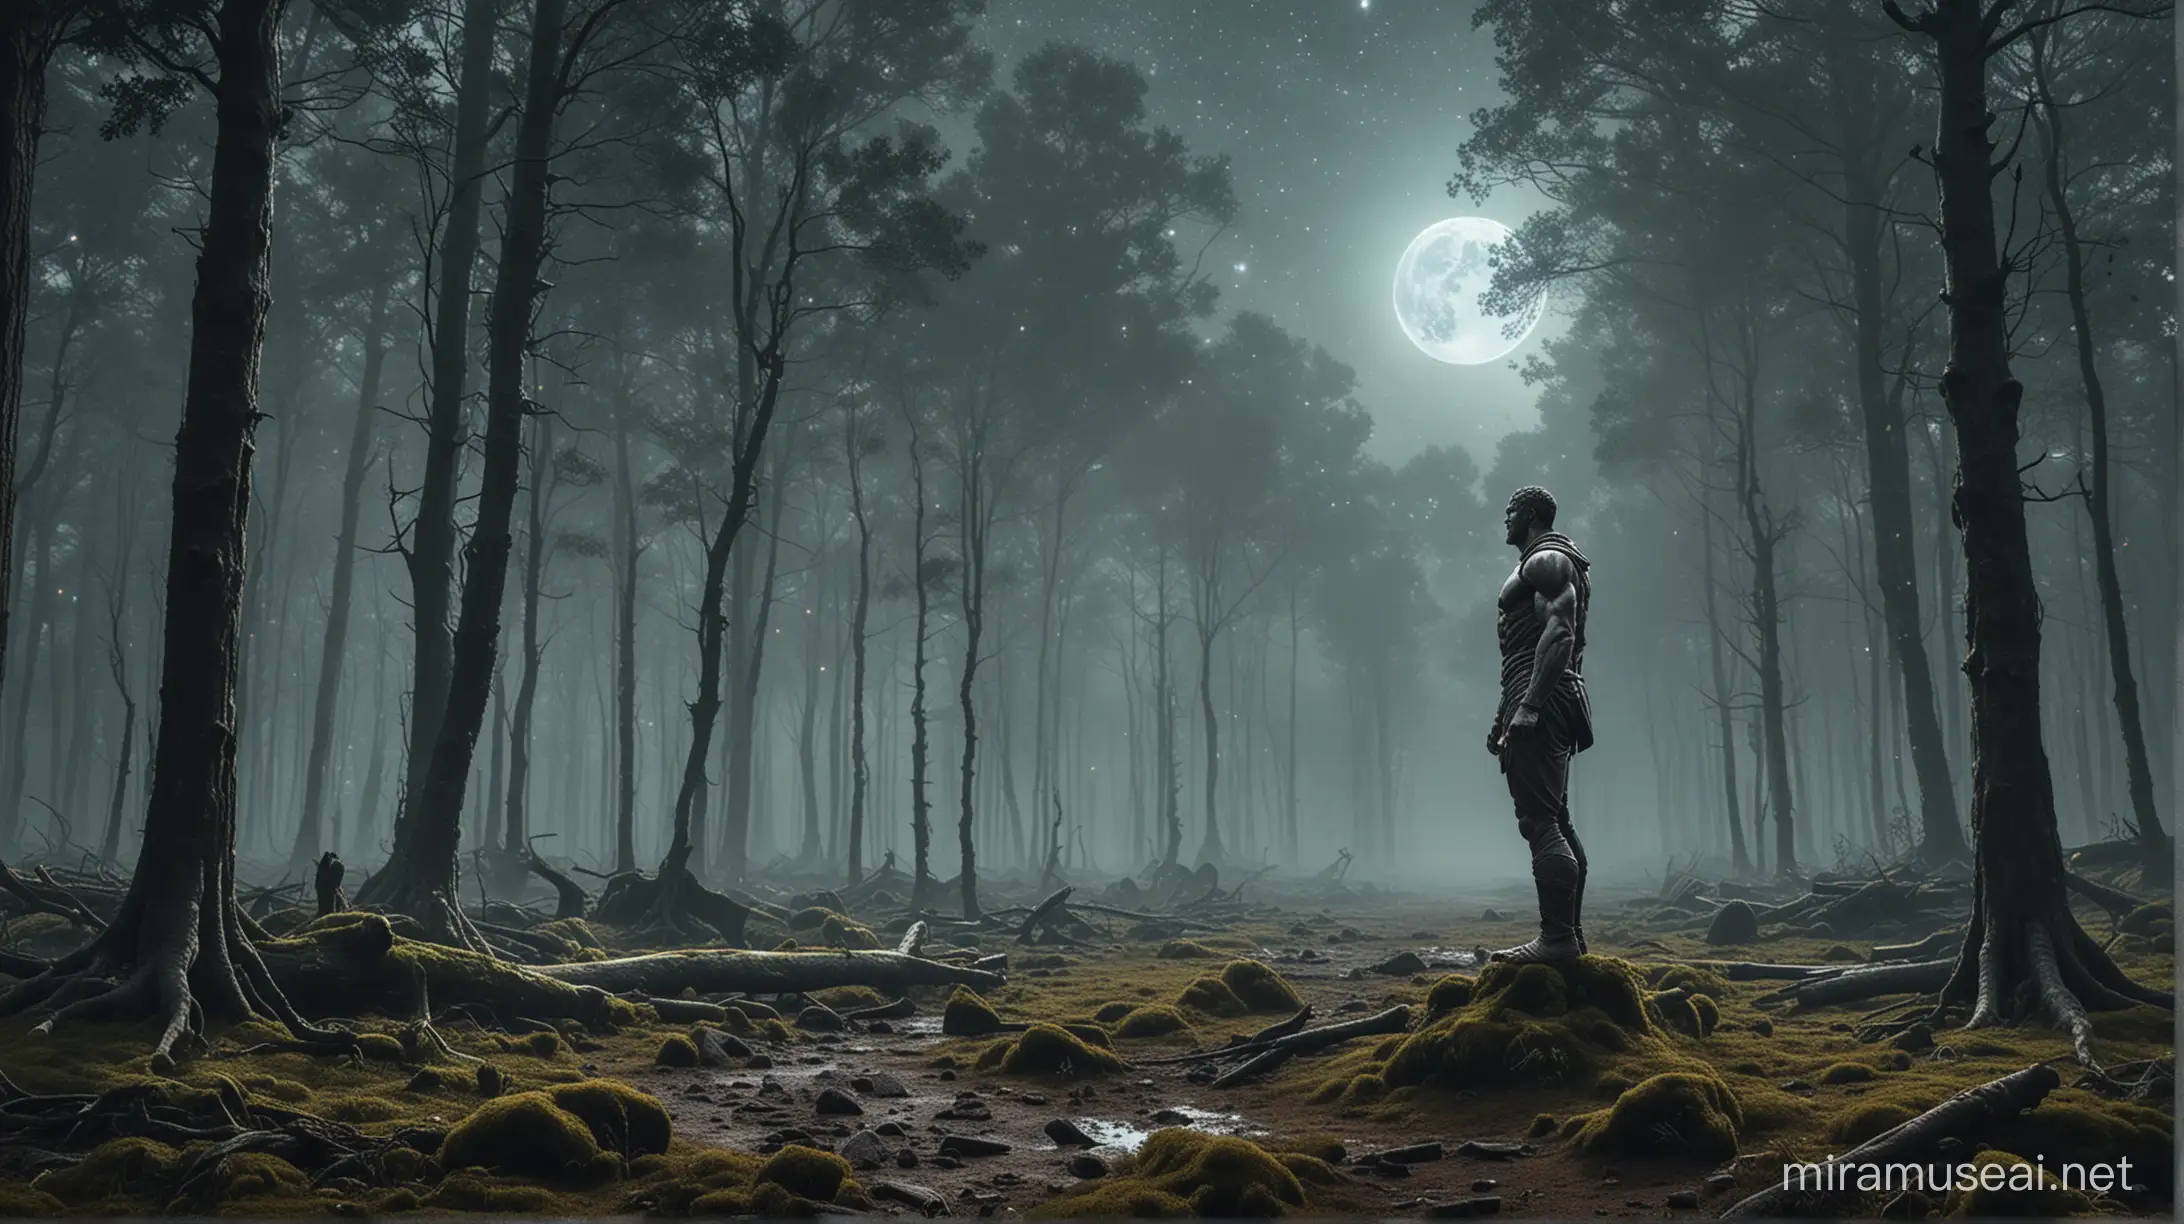 Stoic Muscular Figure Contemplating in Enigmatic Forest Setting